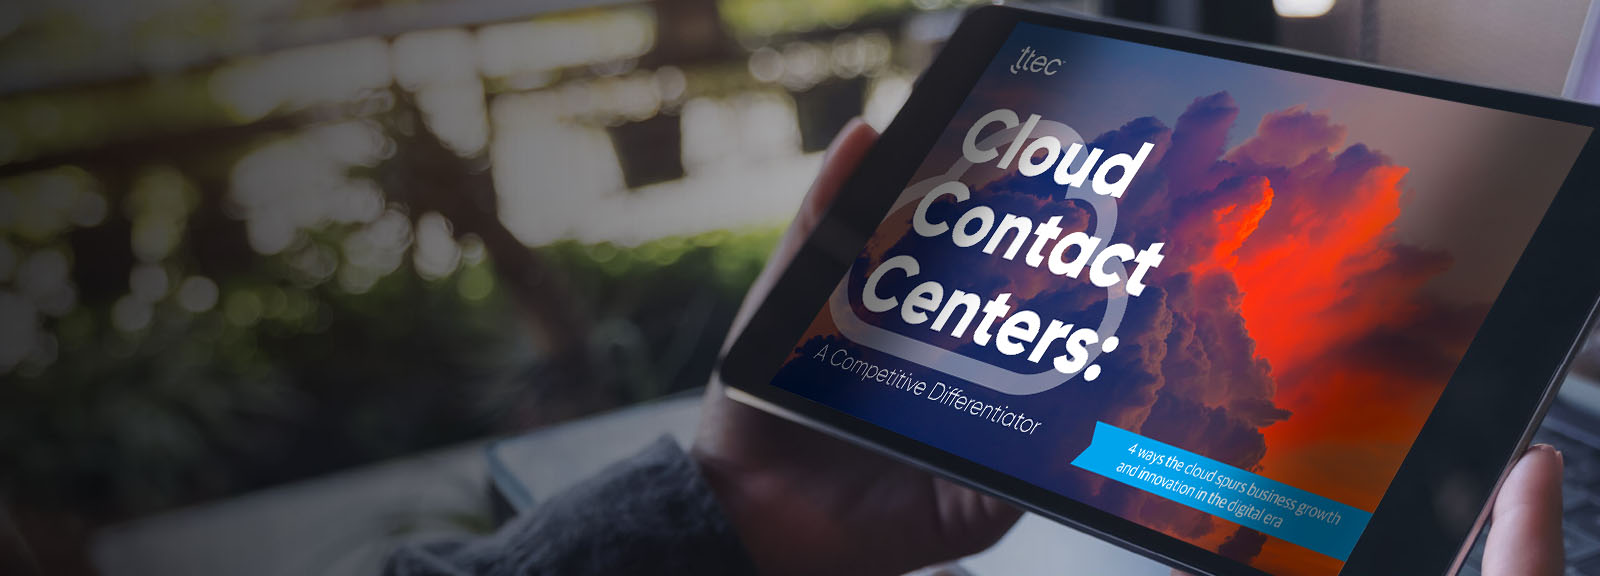 Cloud contact centers cover